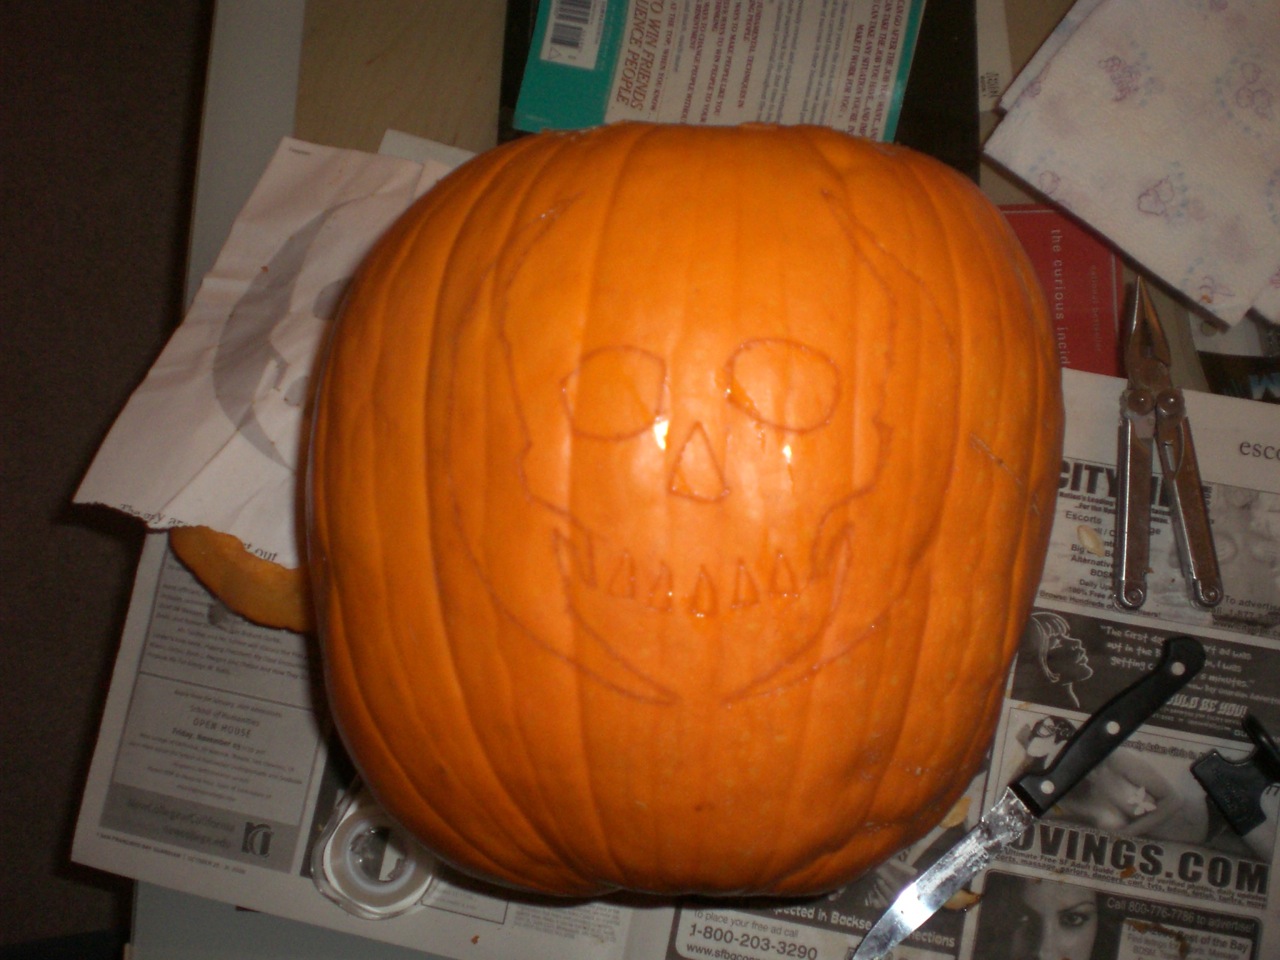 a pumpkin with a face carved on it sitting next to scissors